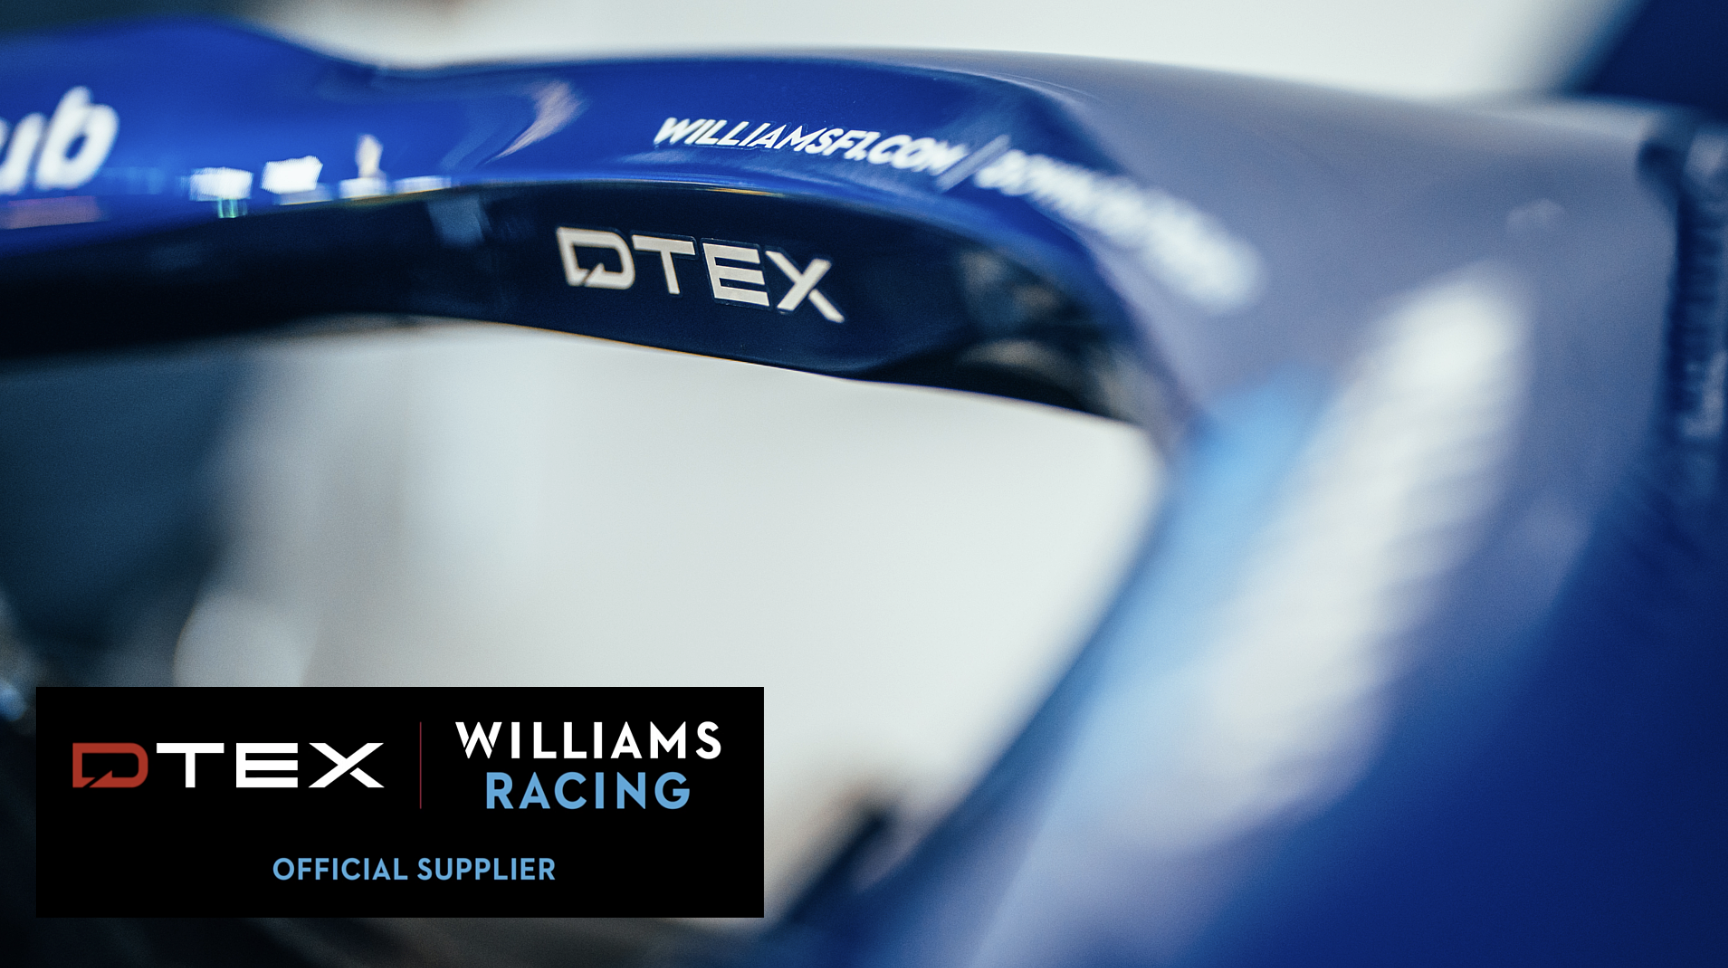 Williams F1 racecar with DTEX logo as official supplier of insider risk management.